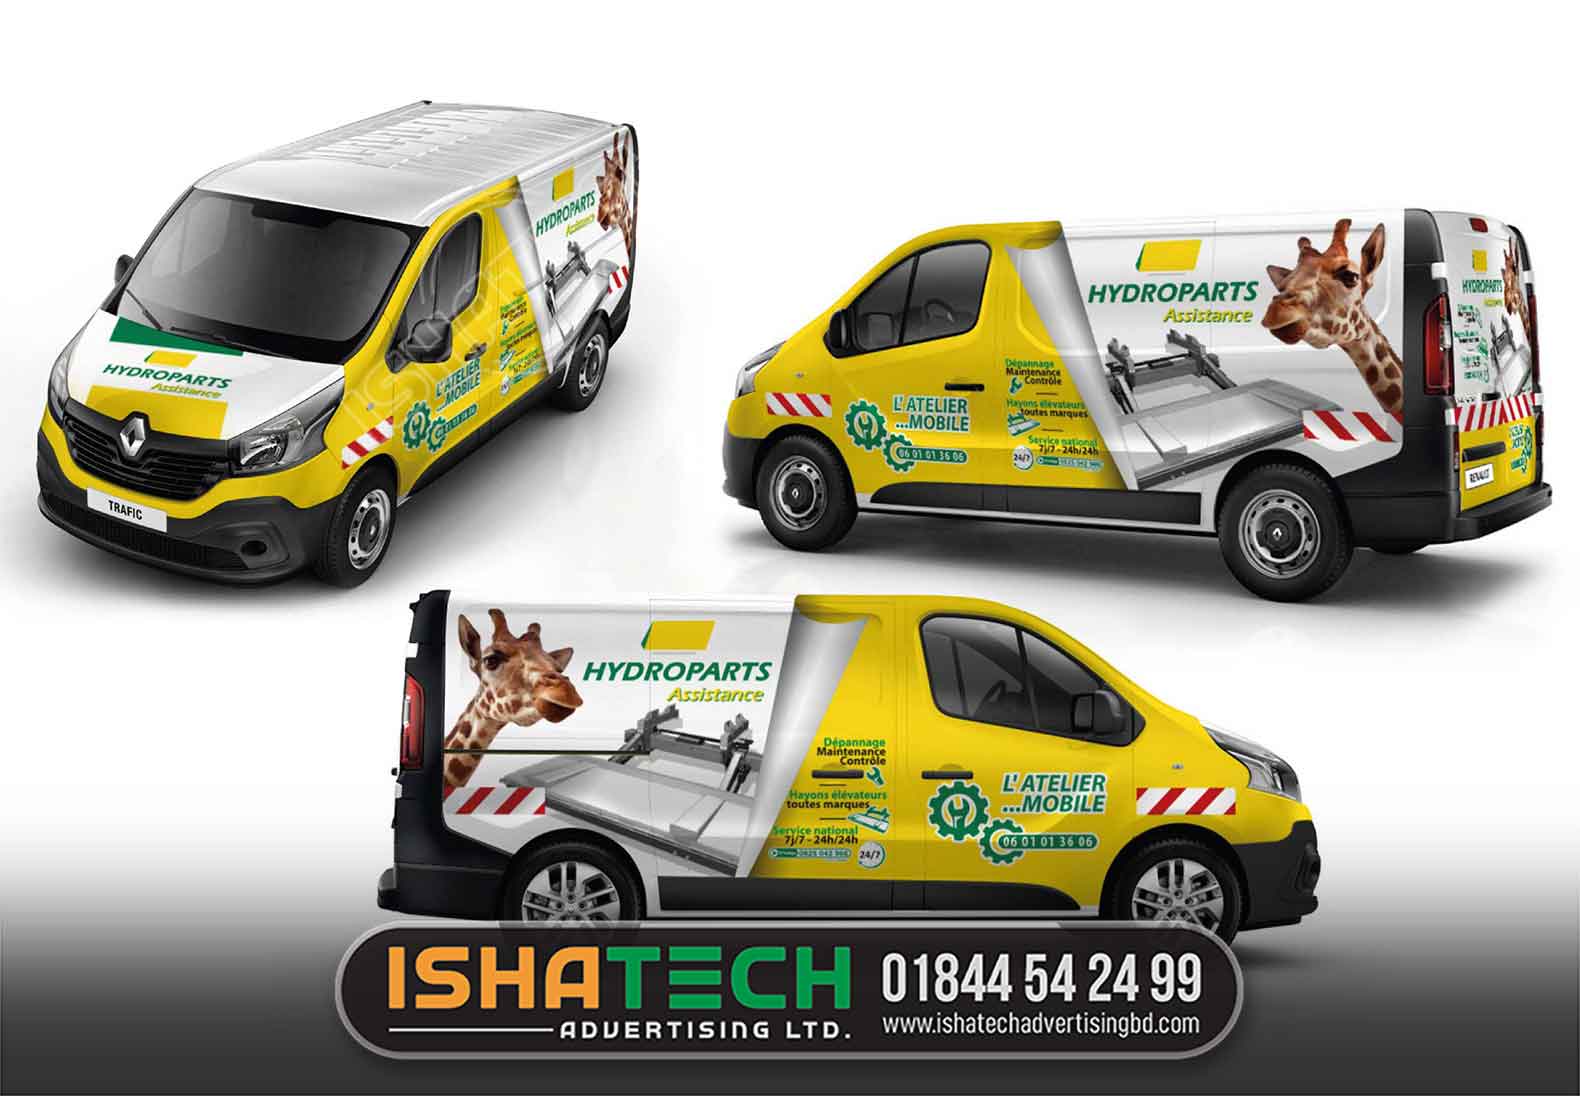 Vehicle wrap is one of the effective ways to promote your business in BD